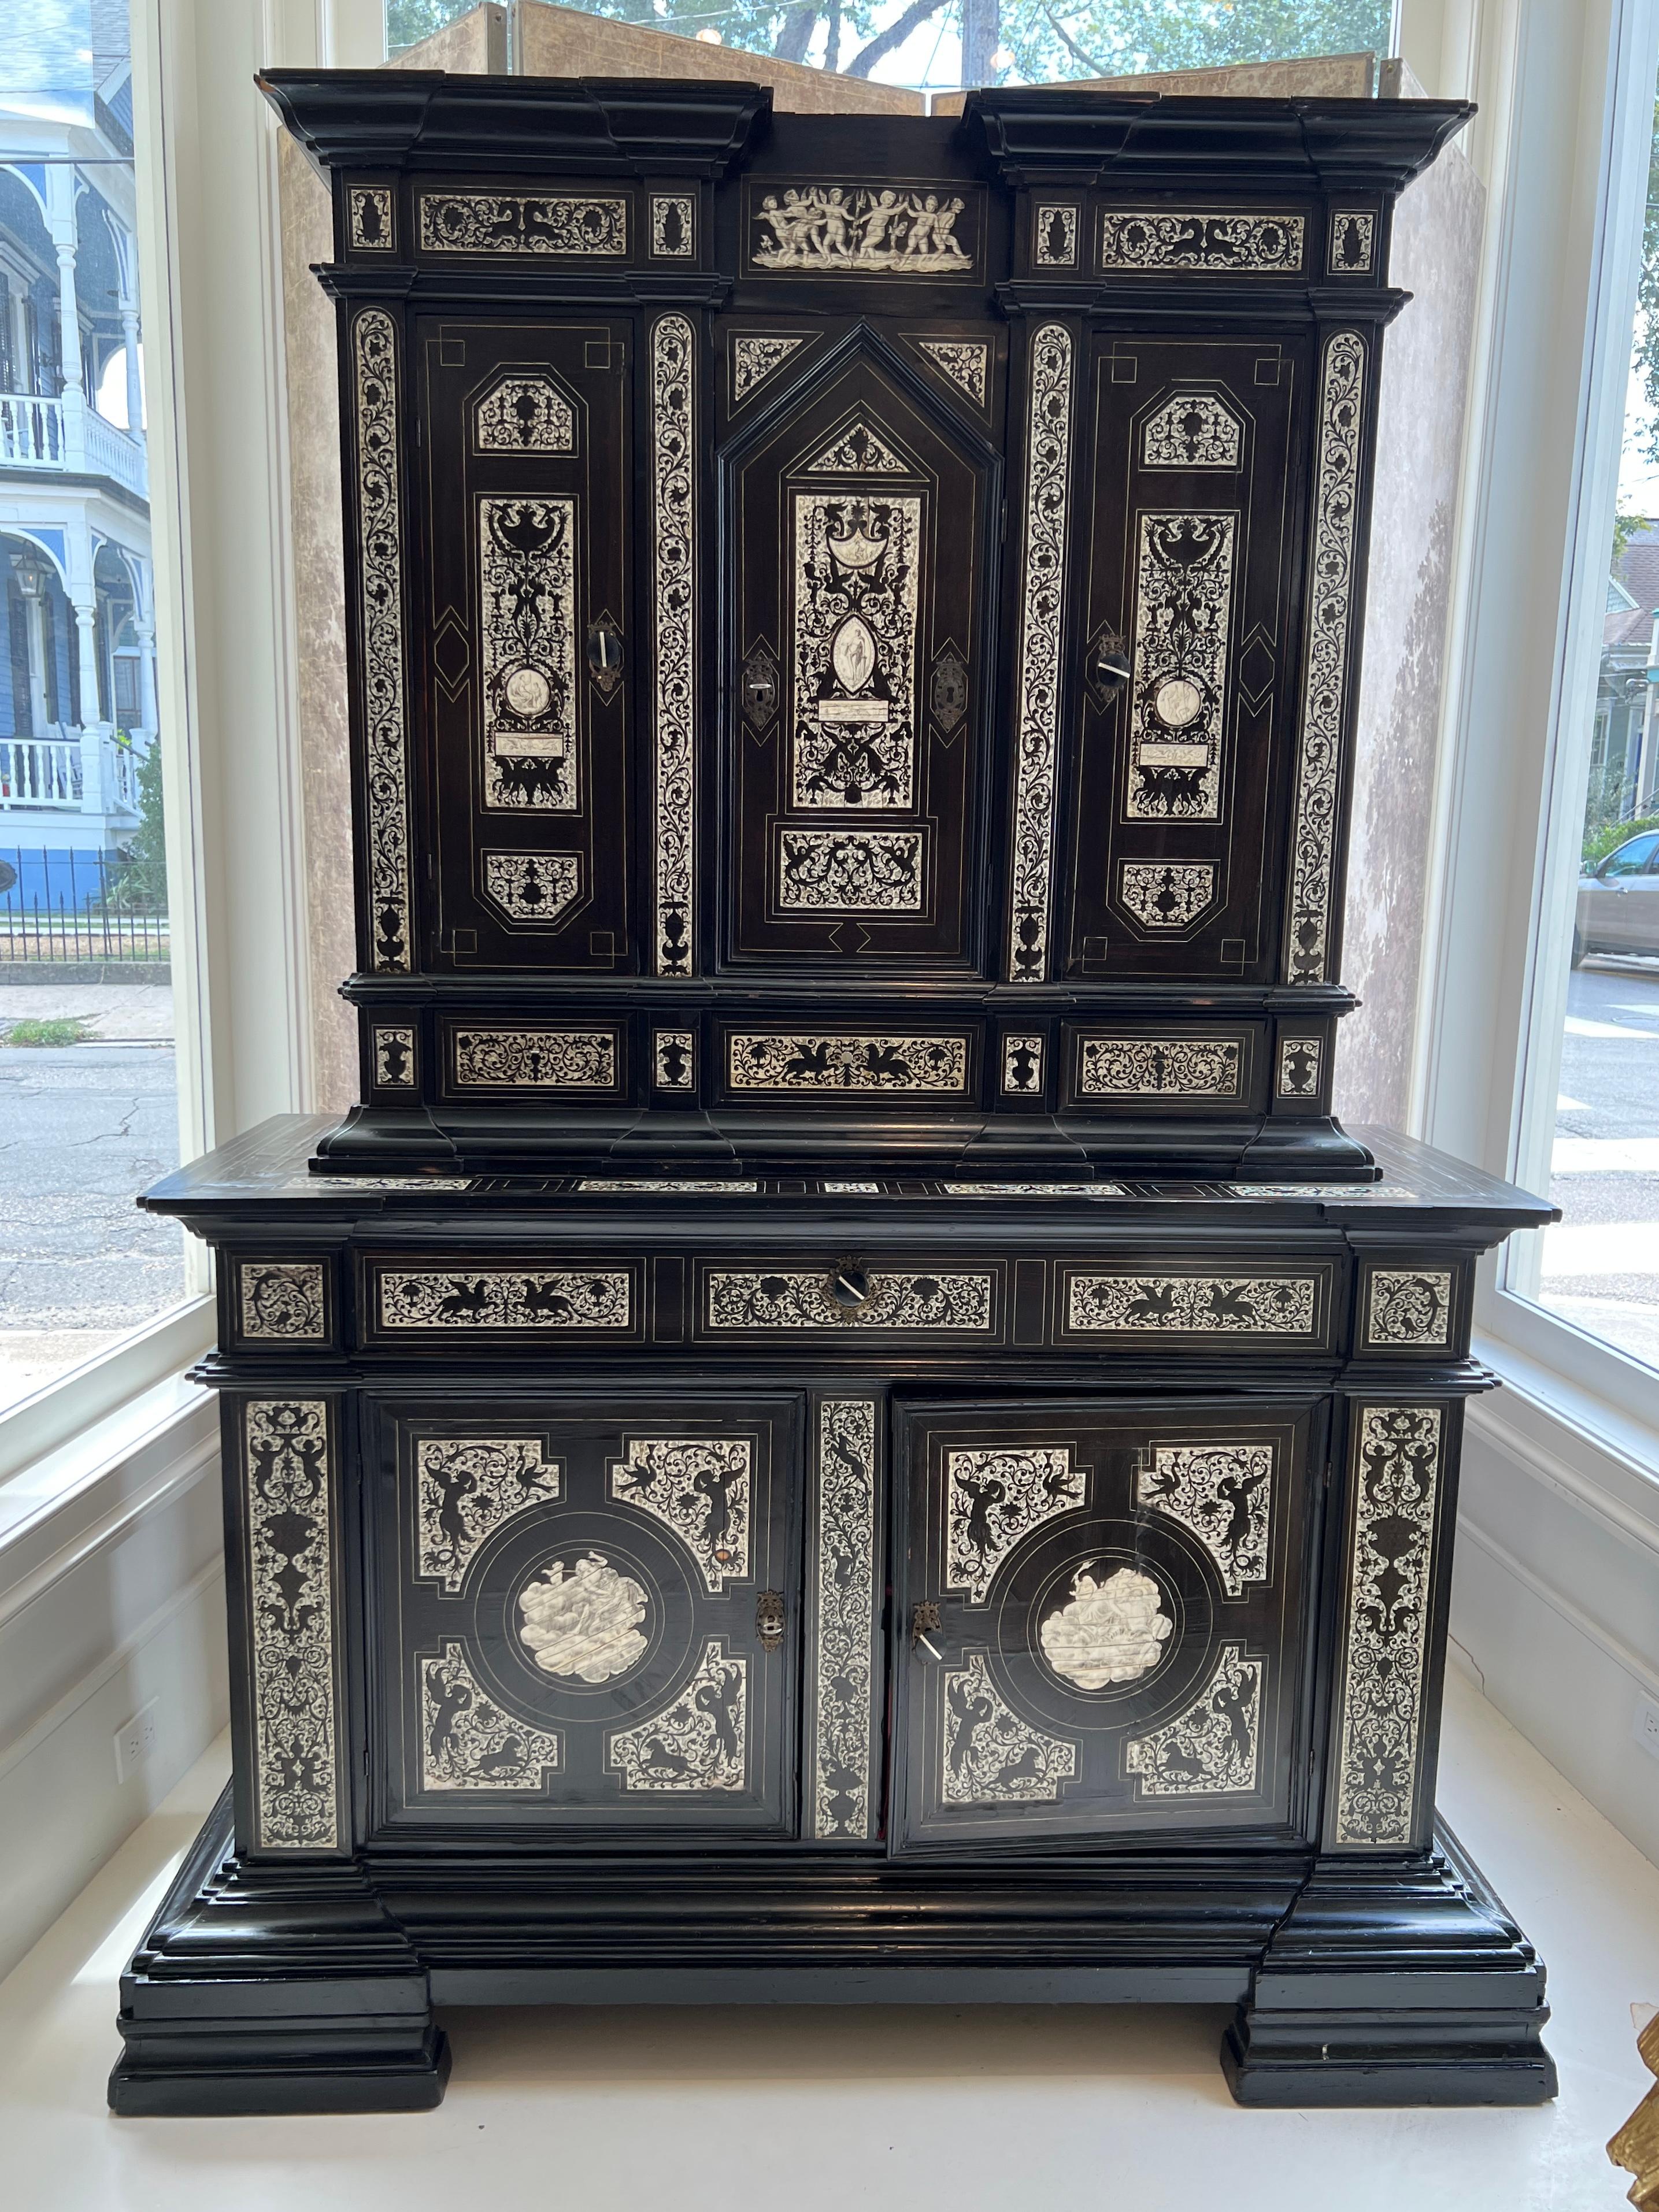 Behold this extraordinary cabinet by Fernando Pogliani from Milan that is a layered fantasia of ebony and bone. The front is intricately worked inlay depicting everything from angels and horses to peacocks and griffons. This is truly a wholly unique